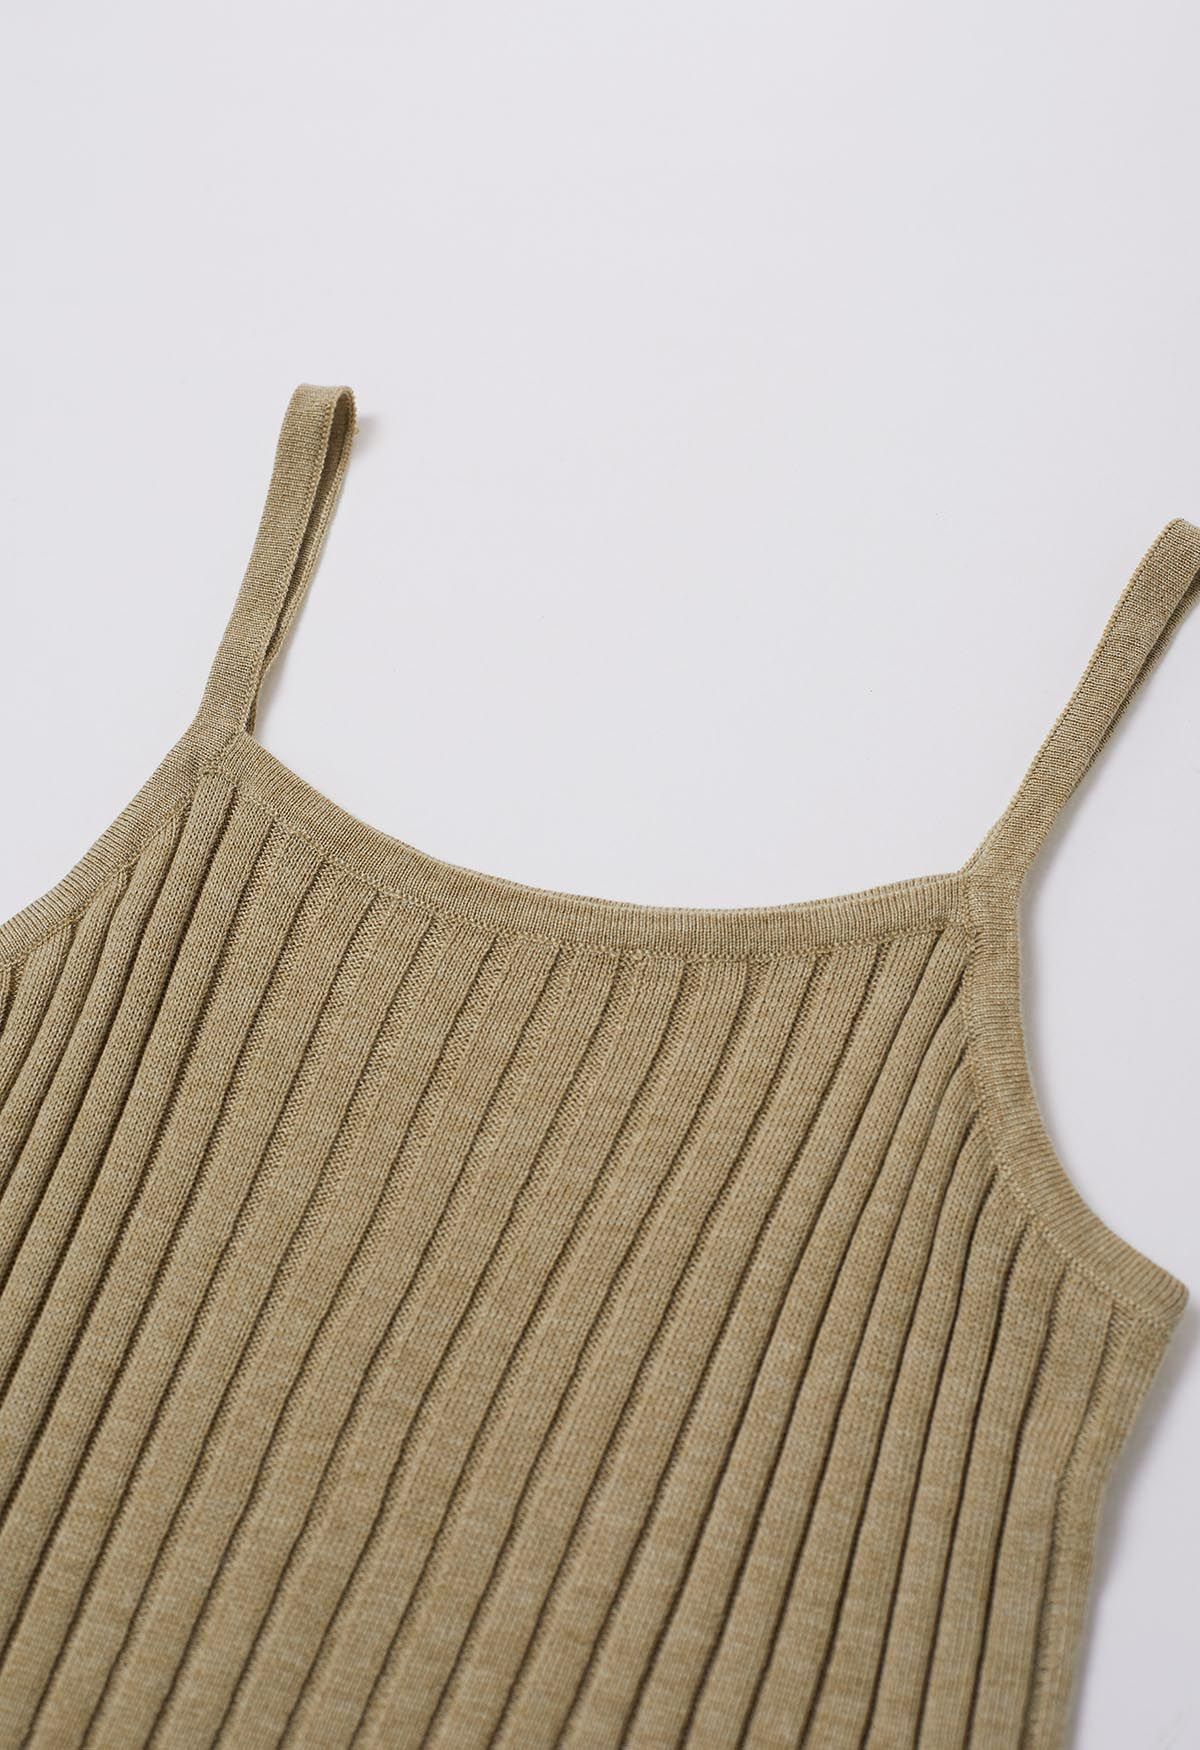 Solid Ribbed Knit Twinset Top in Khaki